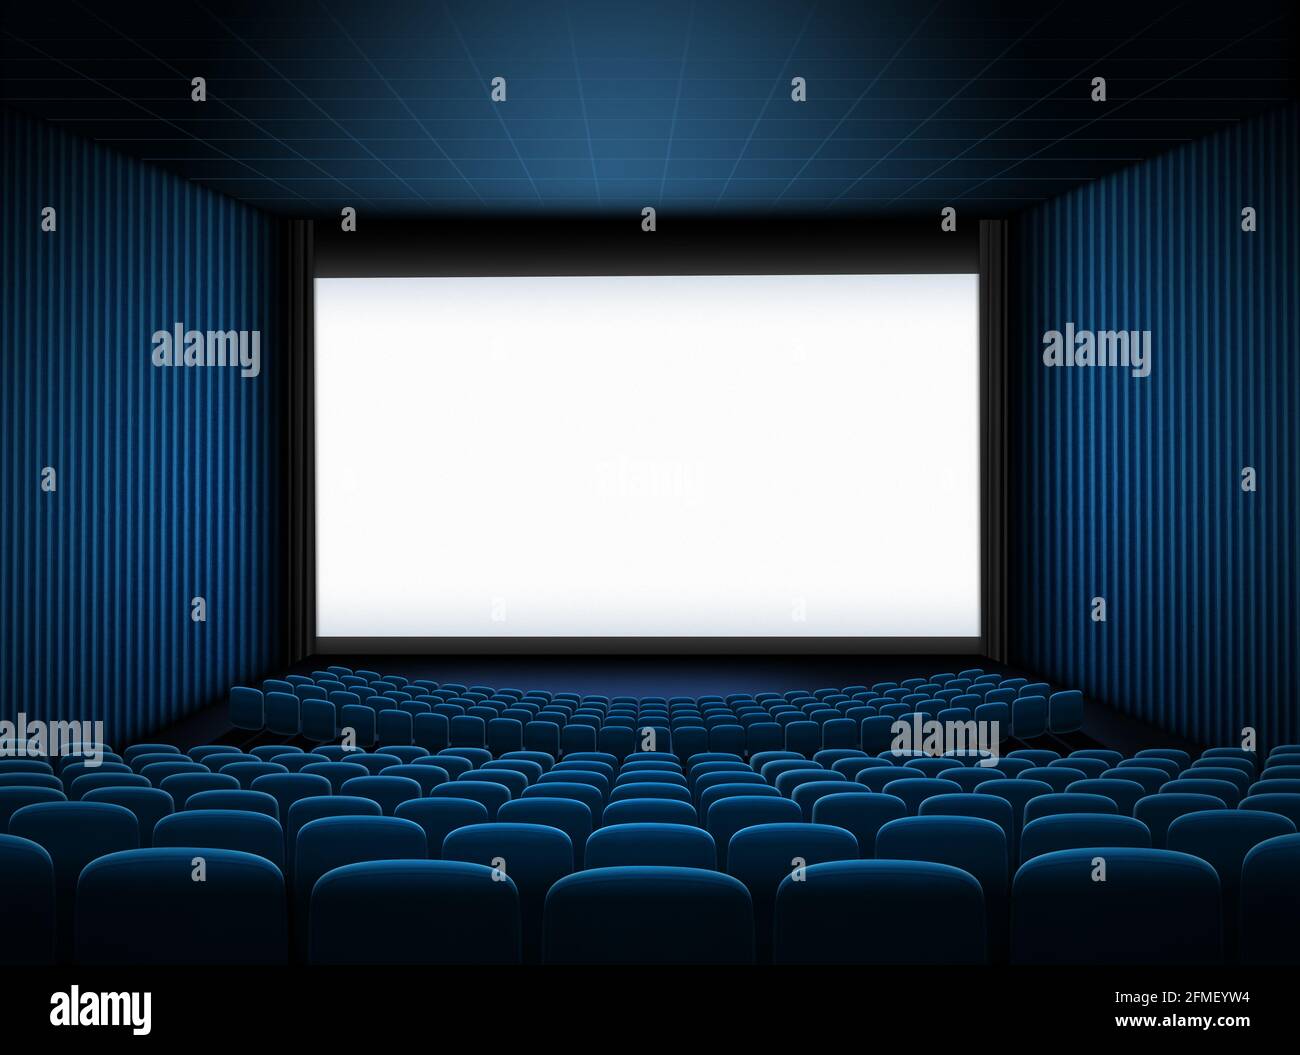 cinema hall with big screen and blue seats 3d illustration Stock Photo